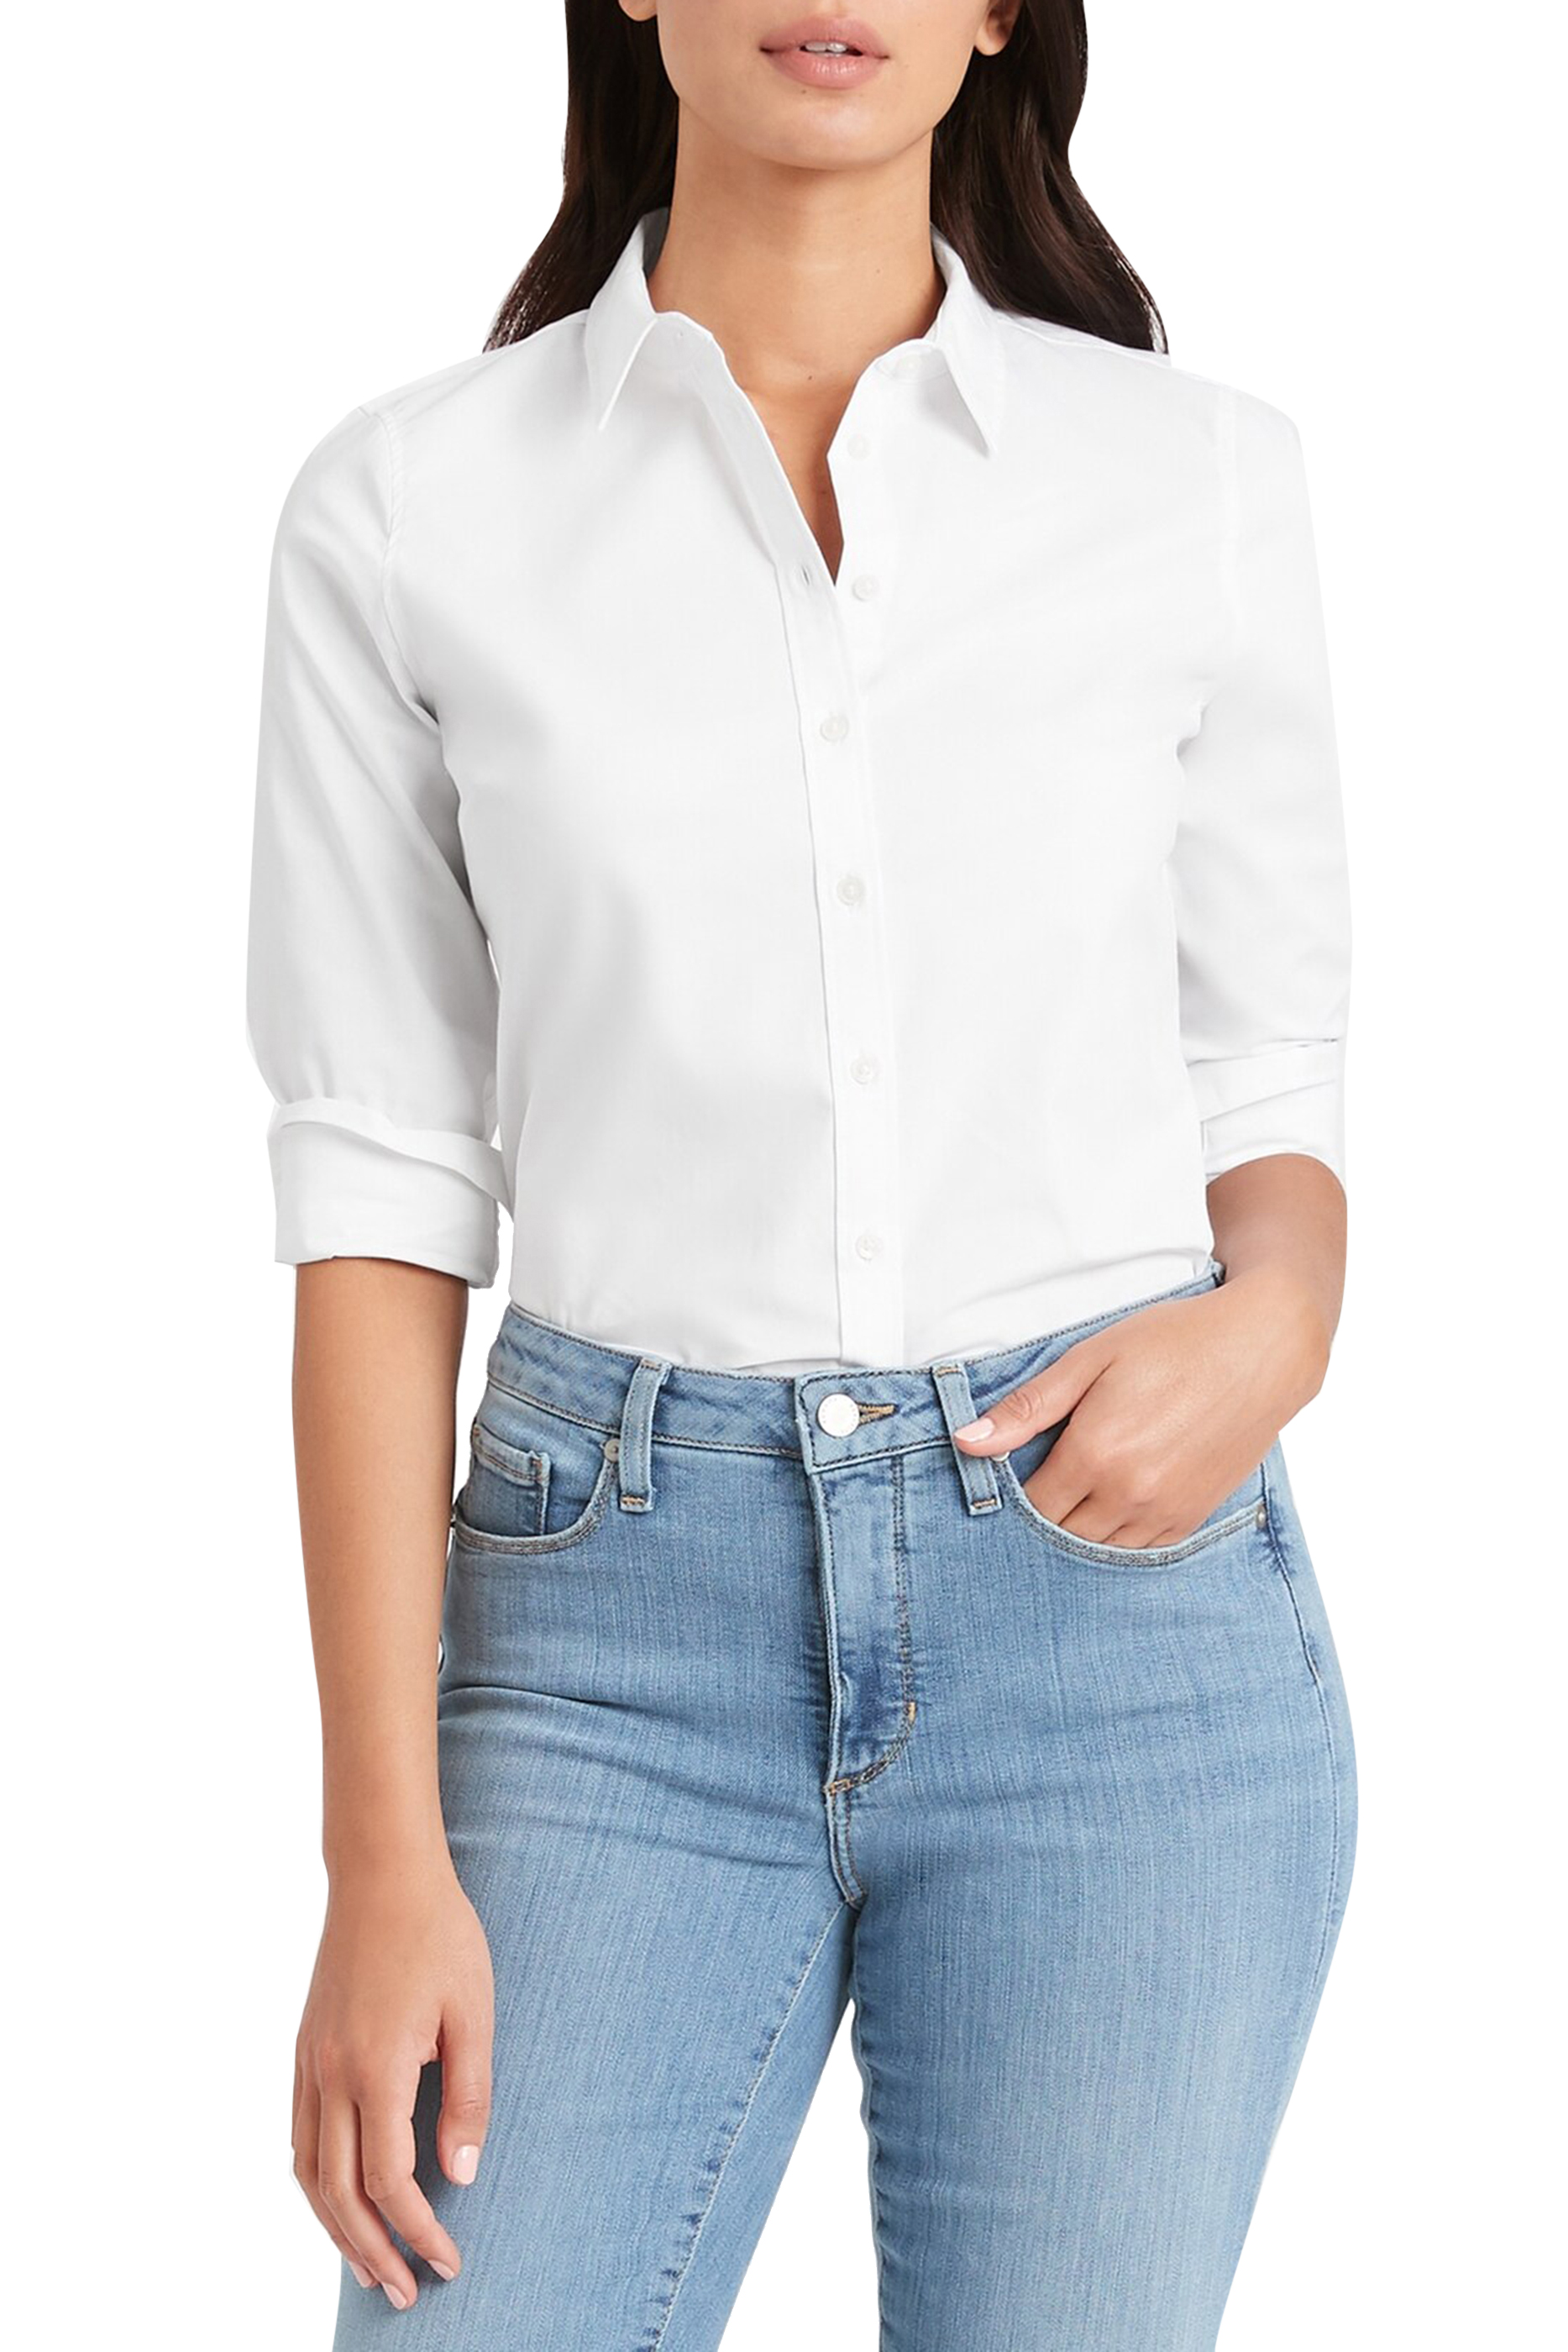 Buy Banana Republic Riley Fitted Shirt for Womens | Bloomingdale's Kuwait